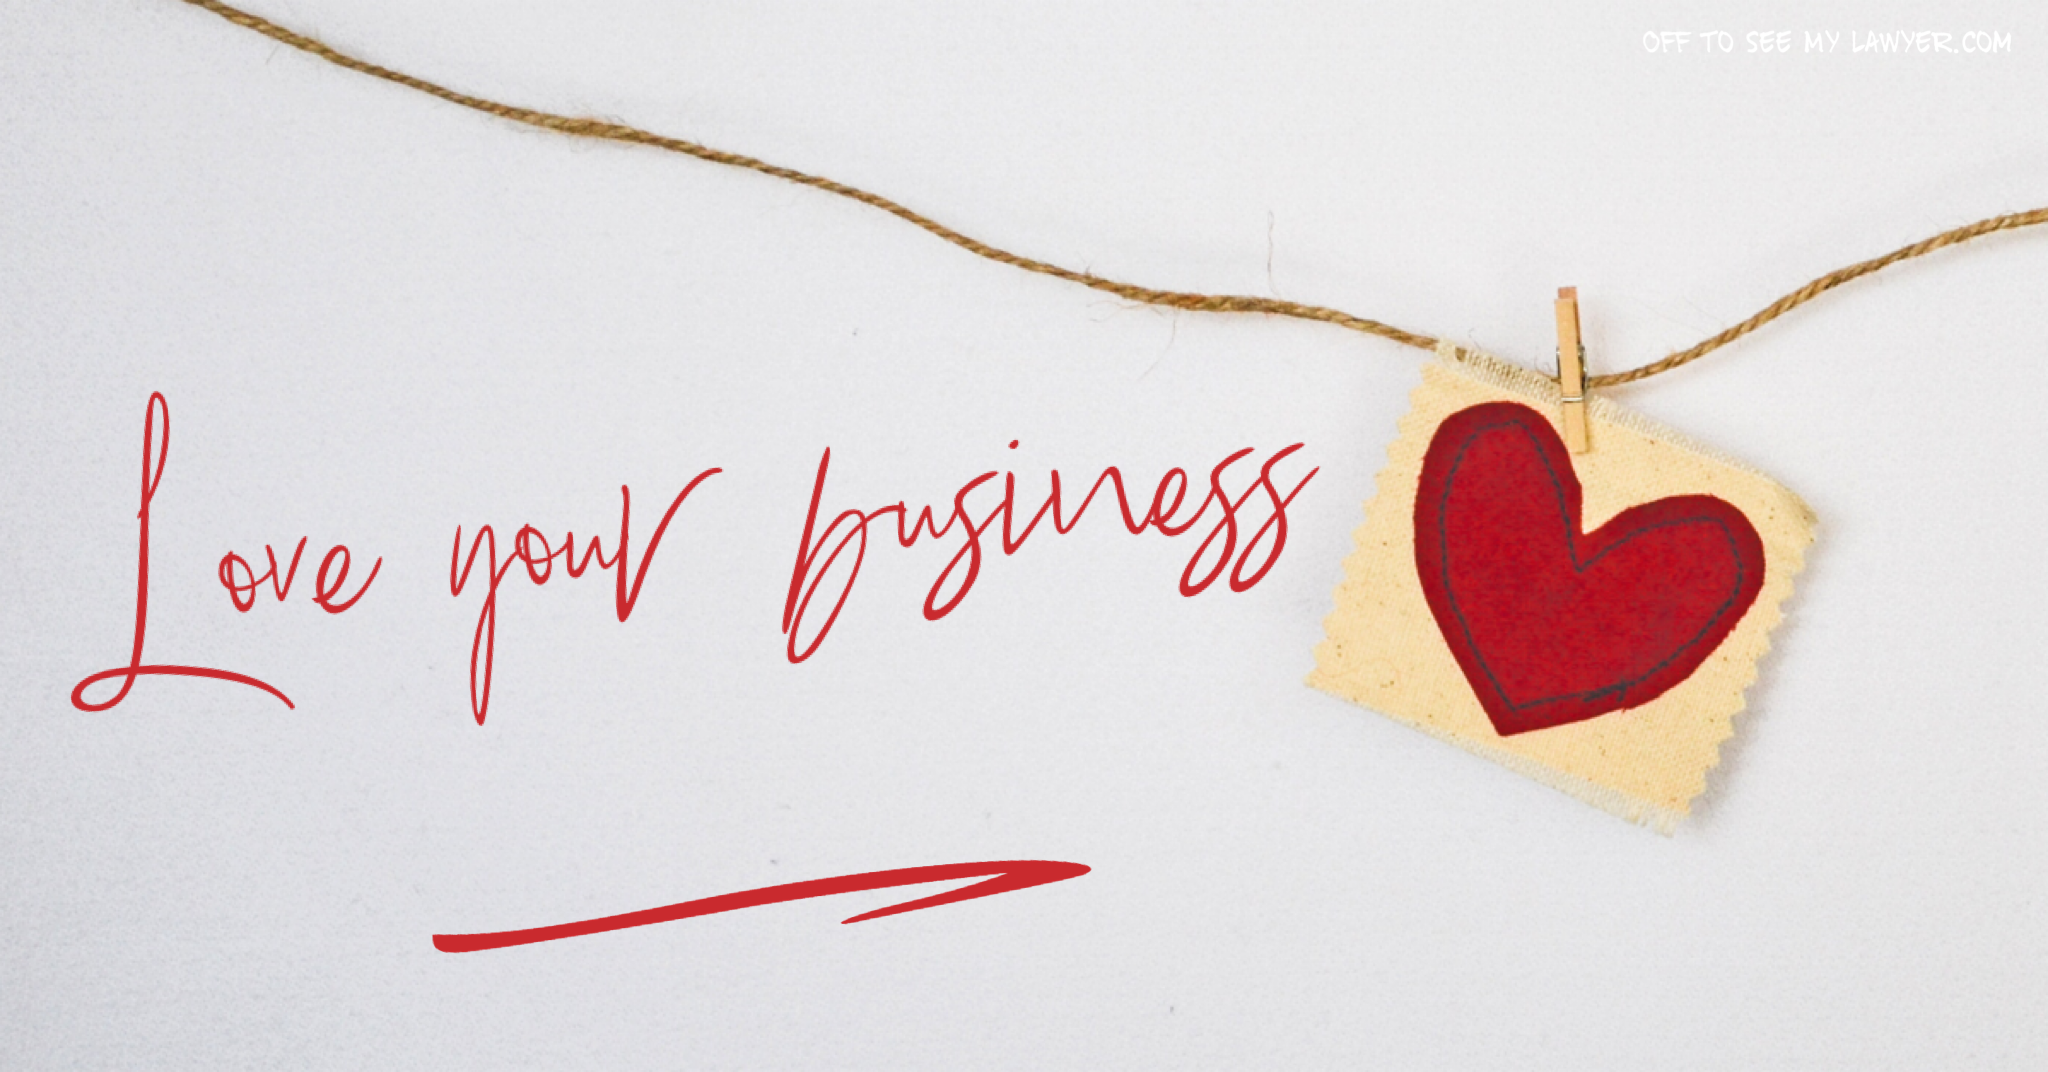 Love Your Business